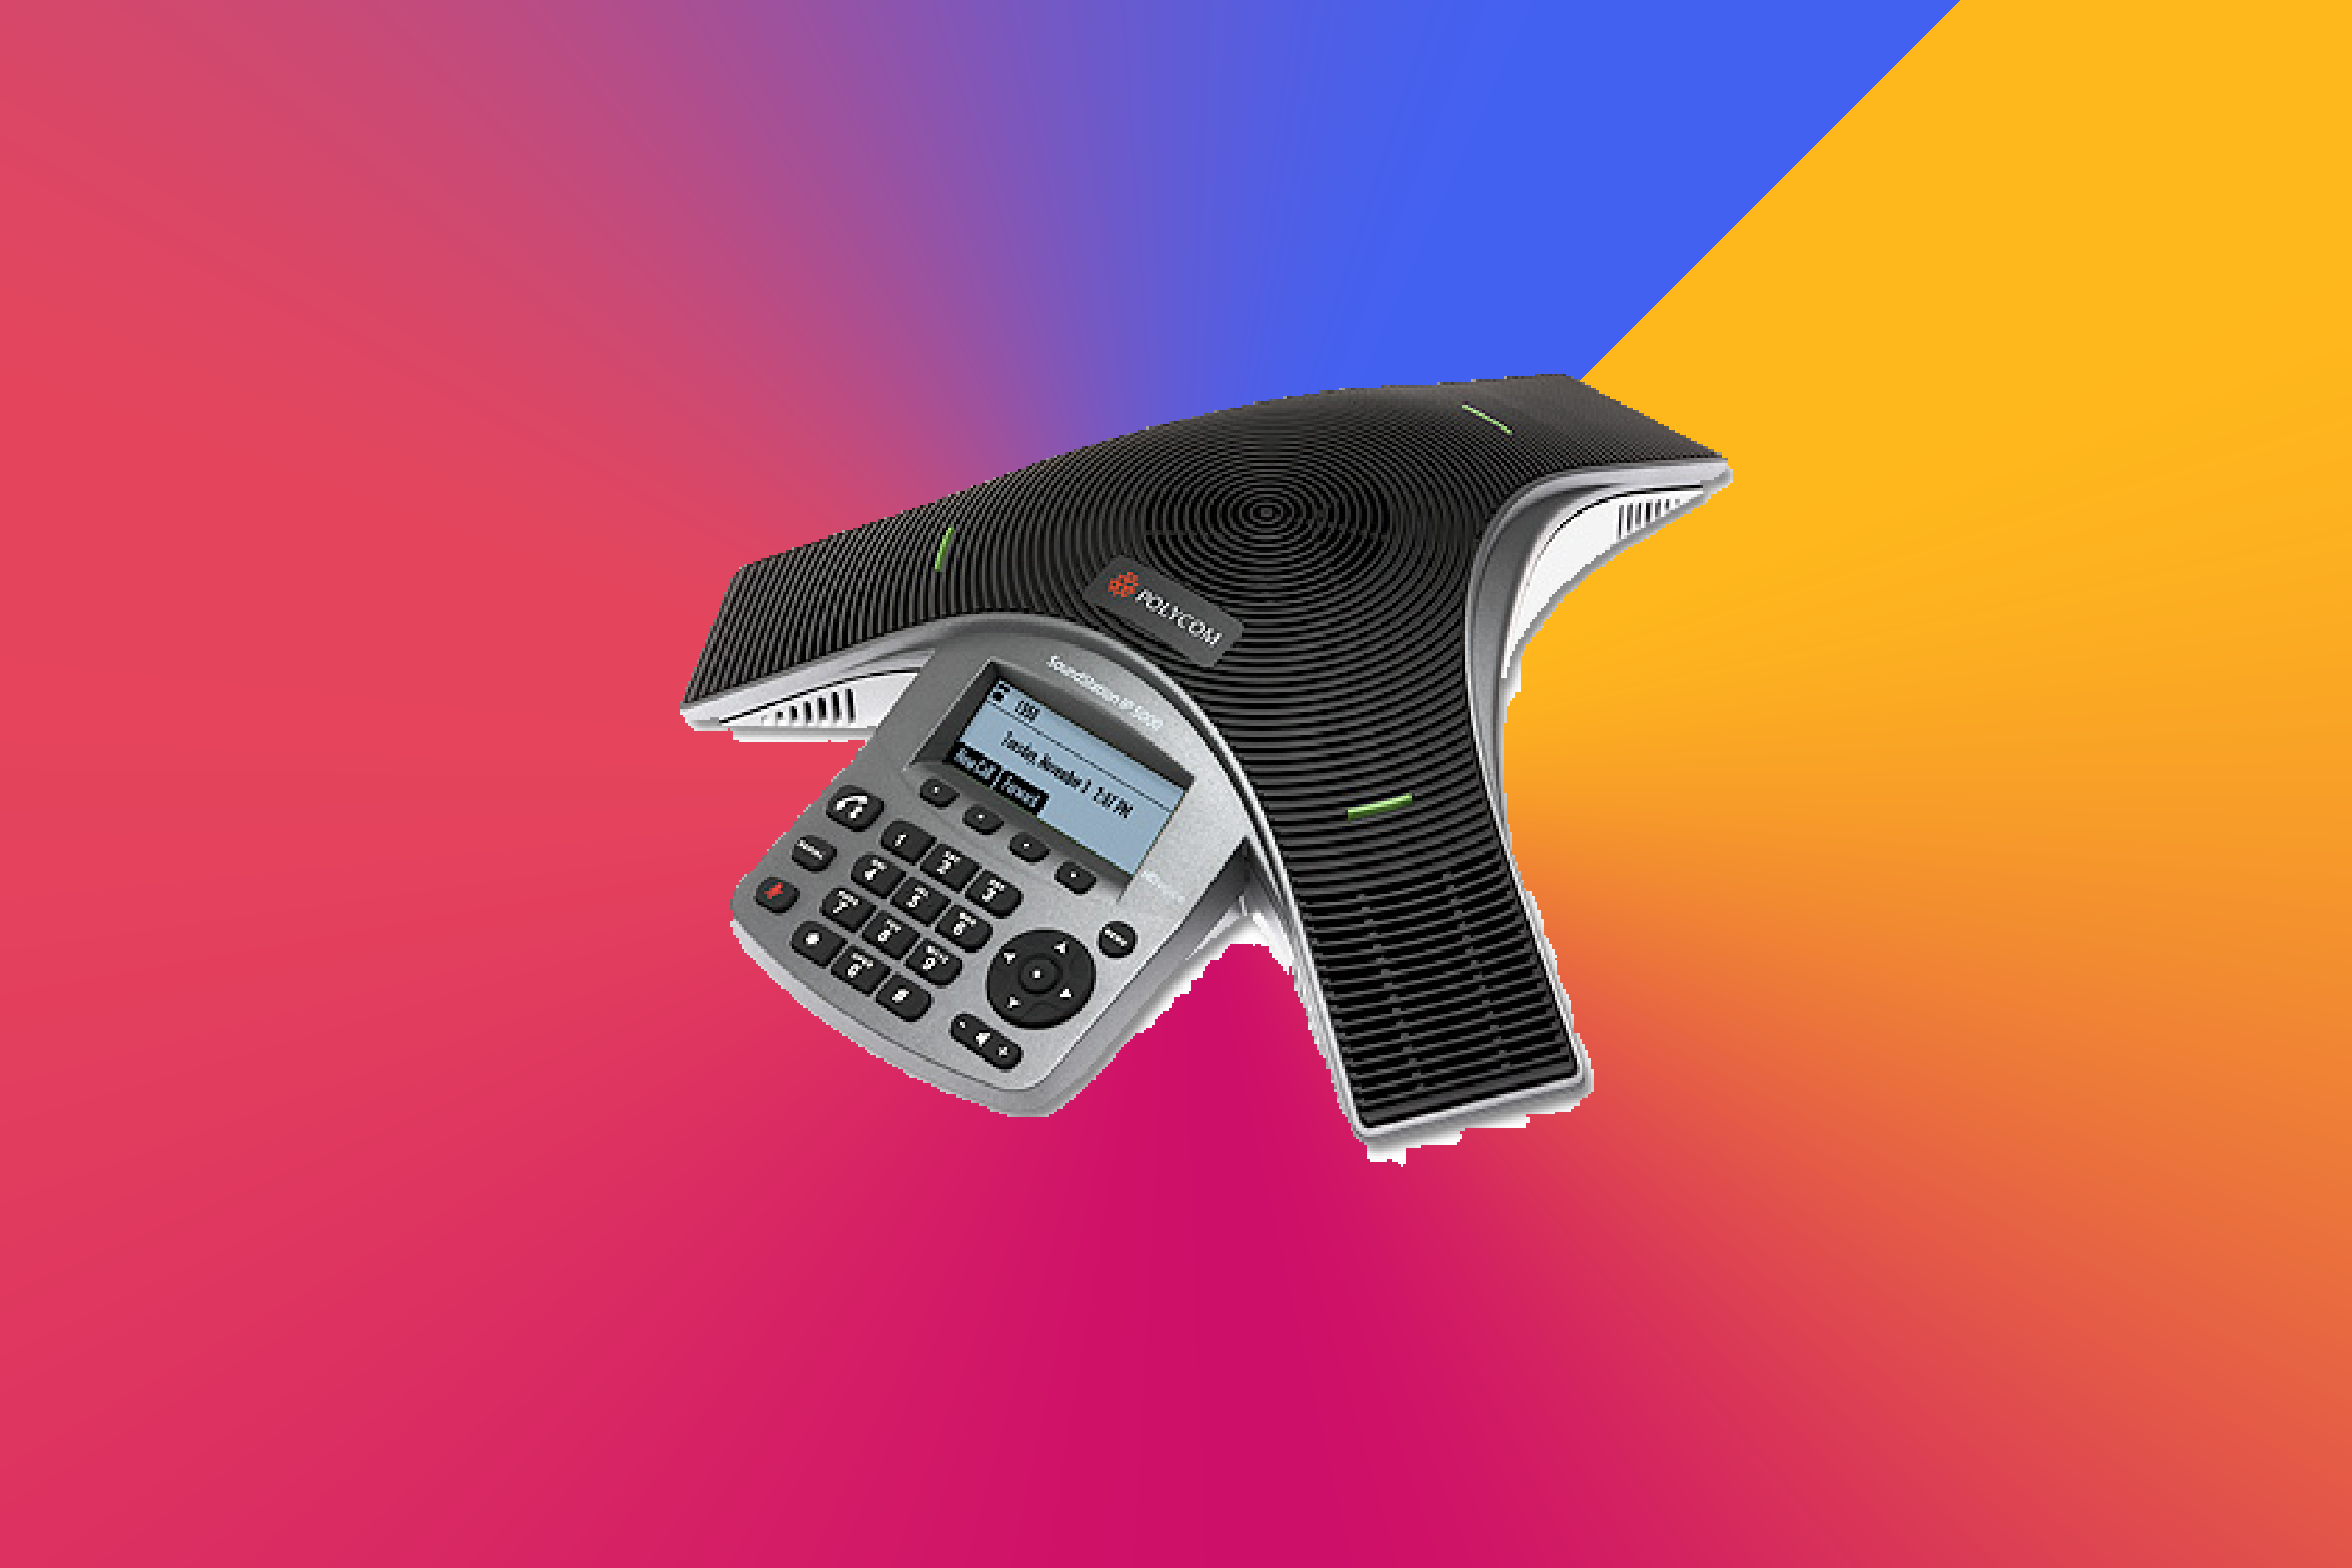 Image of a Poly SoundStation 5000 VoIP conference phone with bright background